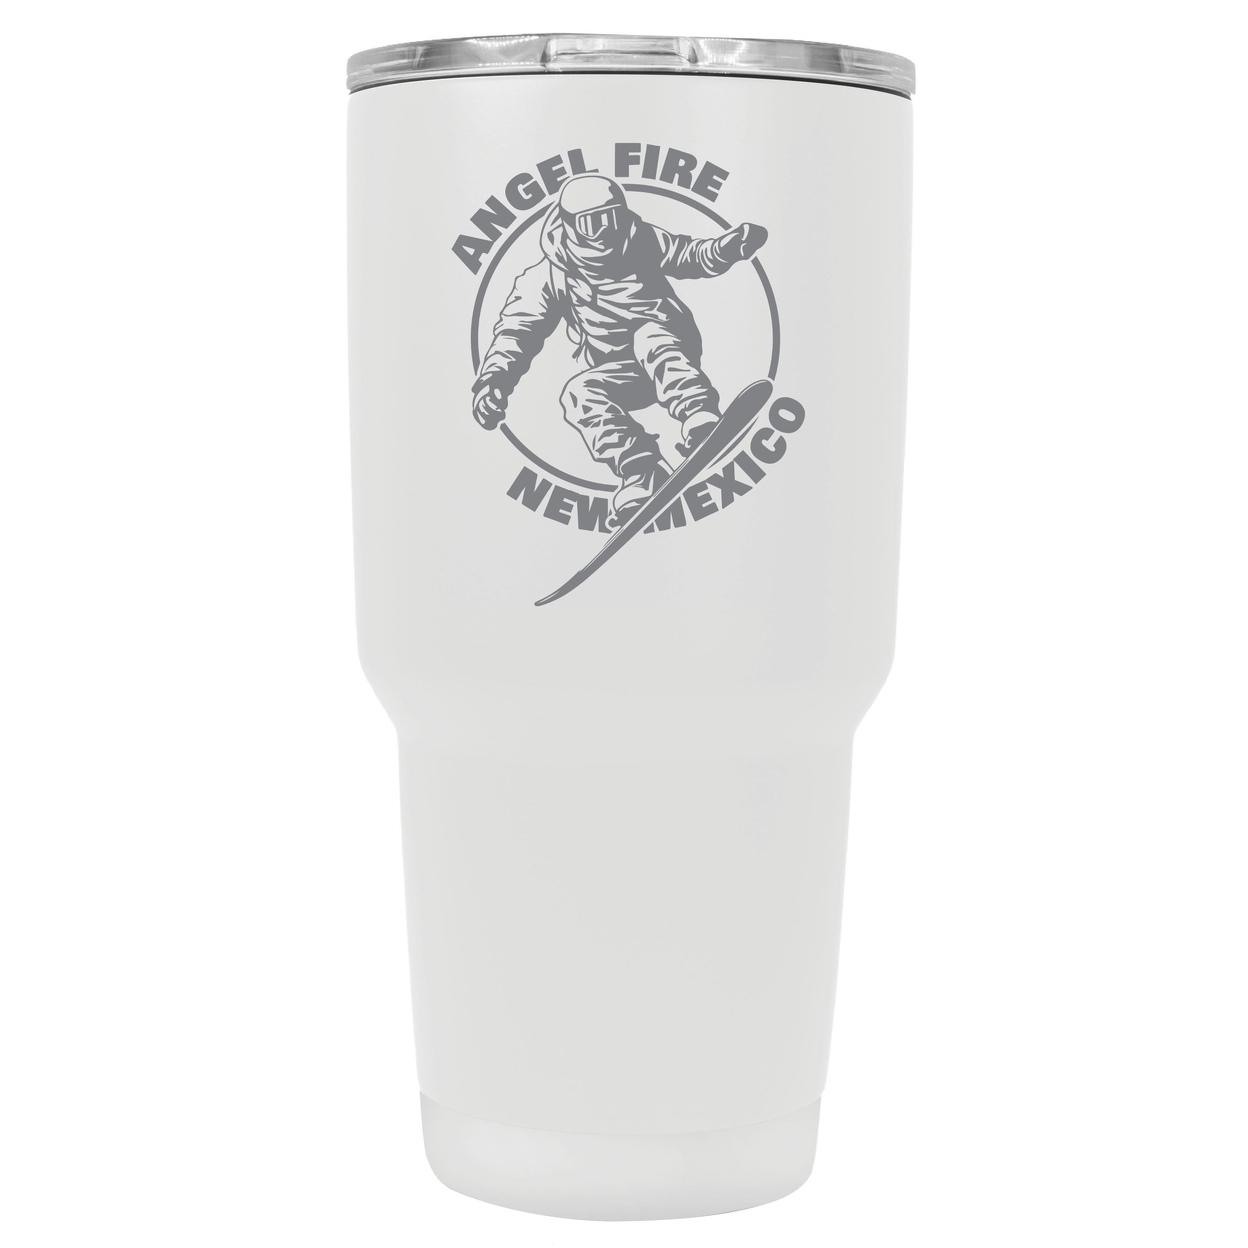 Angel Fire New Mexico Souvenir 24 Oz Engraved Insulated Stainless Steel Tumbler - Navy,,Single Unit